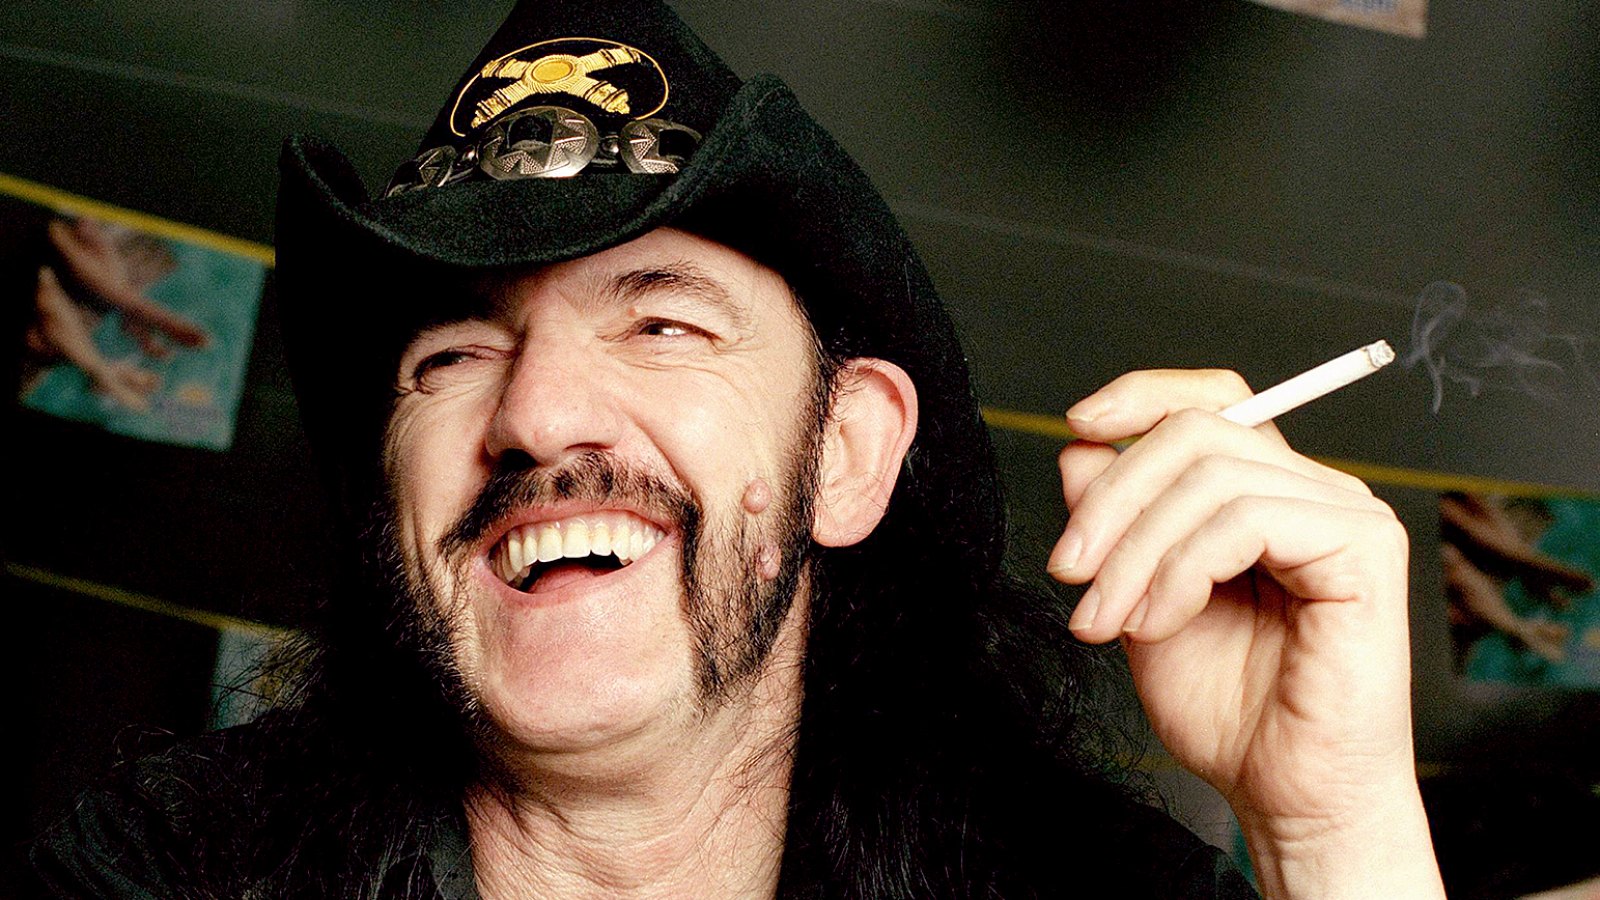 Lemmy in LA at The Rainbow Bar and Grill in May 2004.